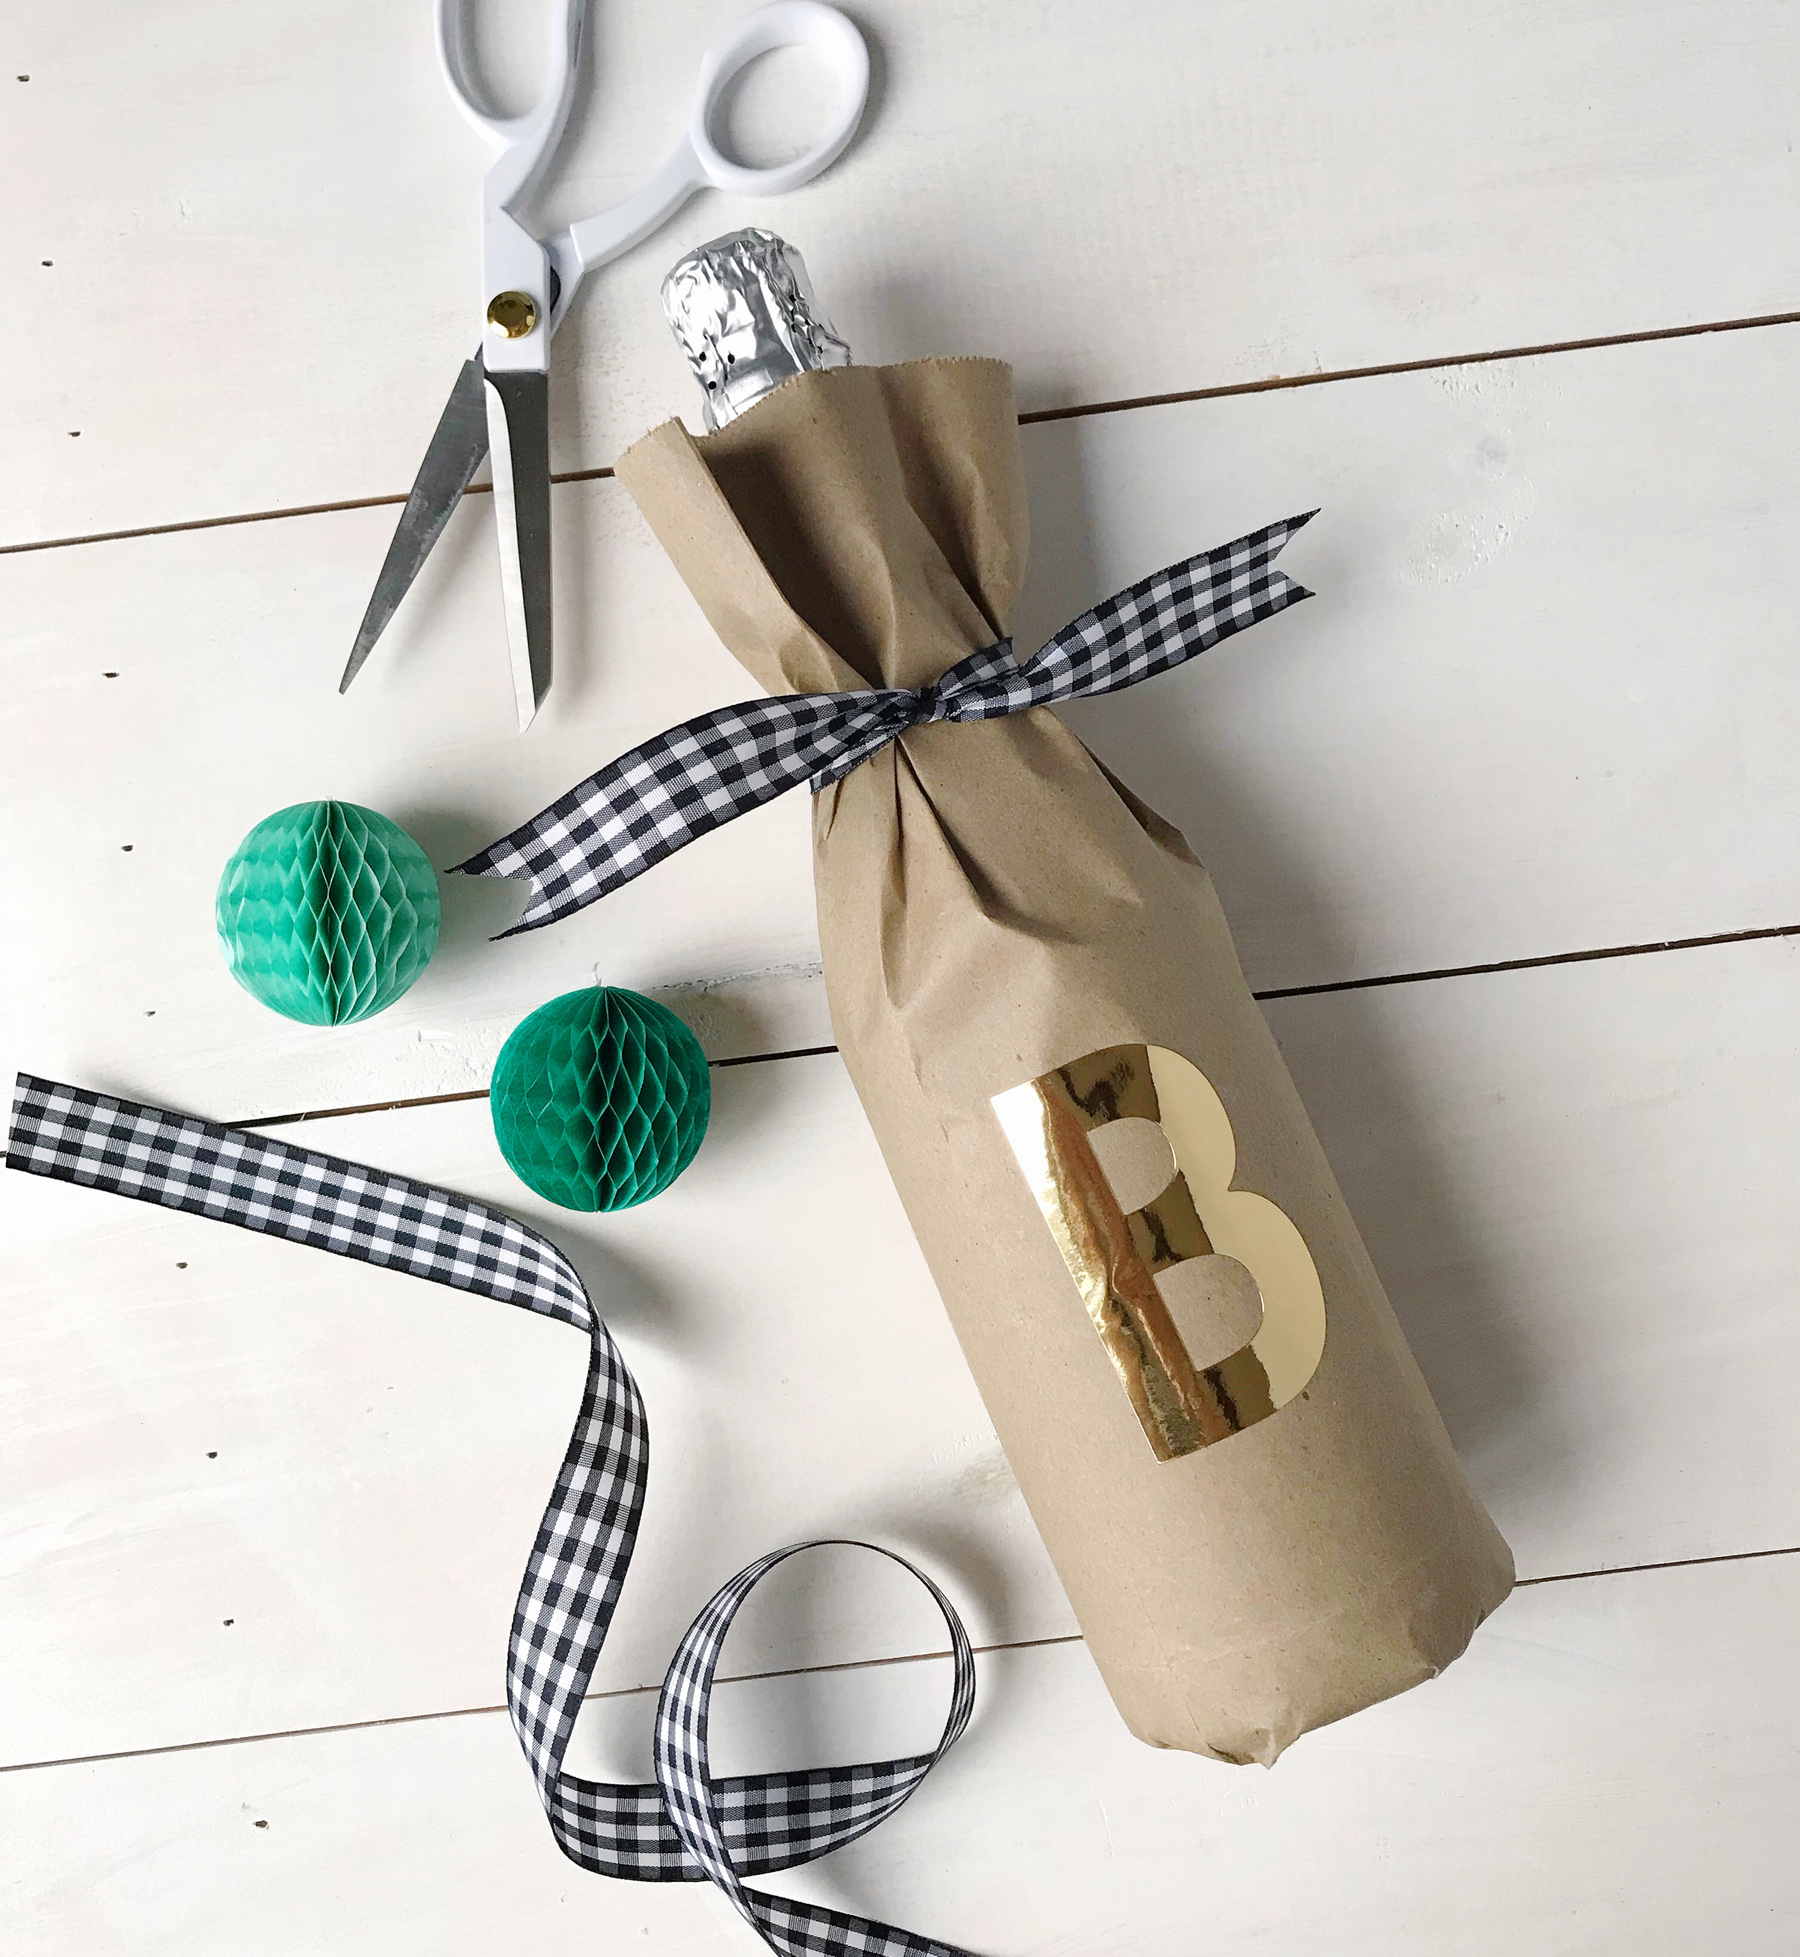 How to Wrap a Wine Bottle for Thanksgiving (Step by Step Instructions)